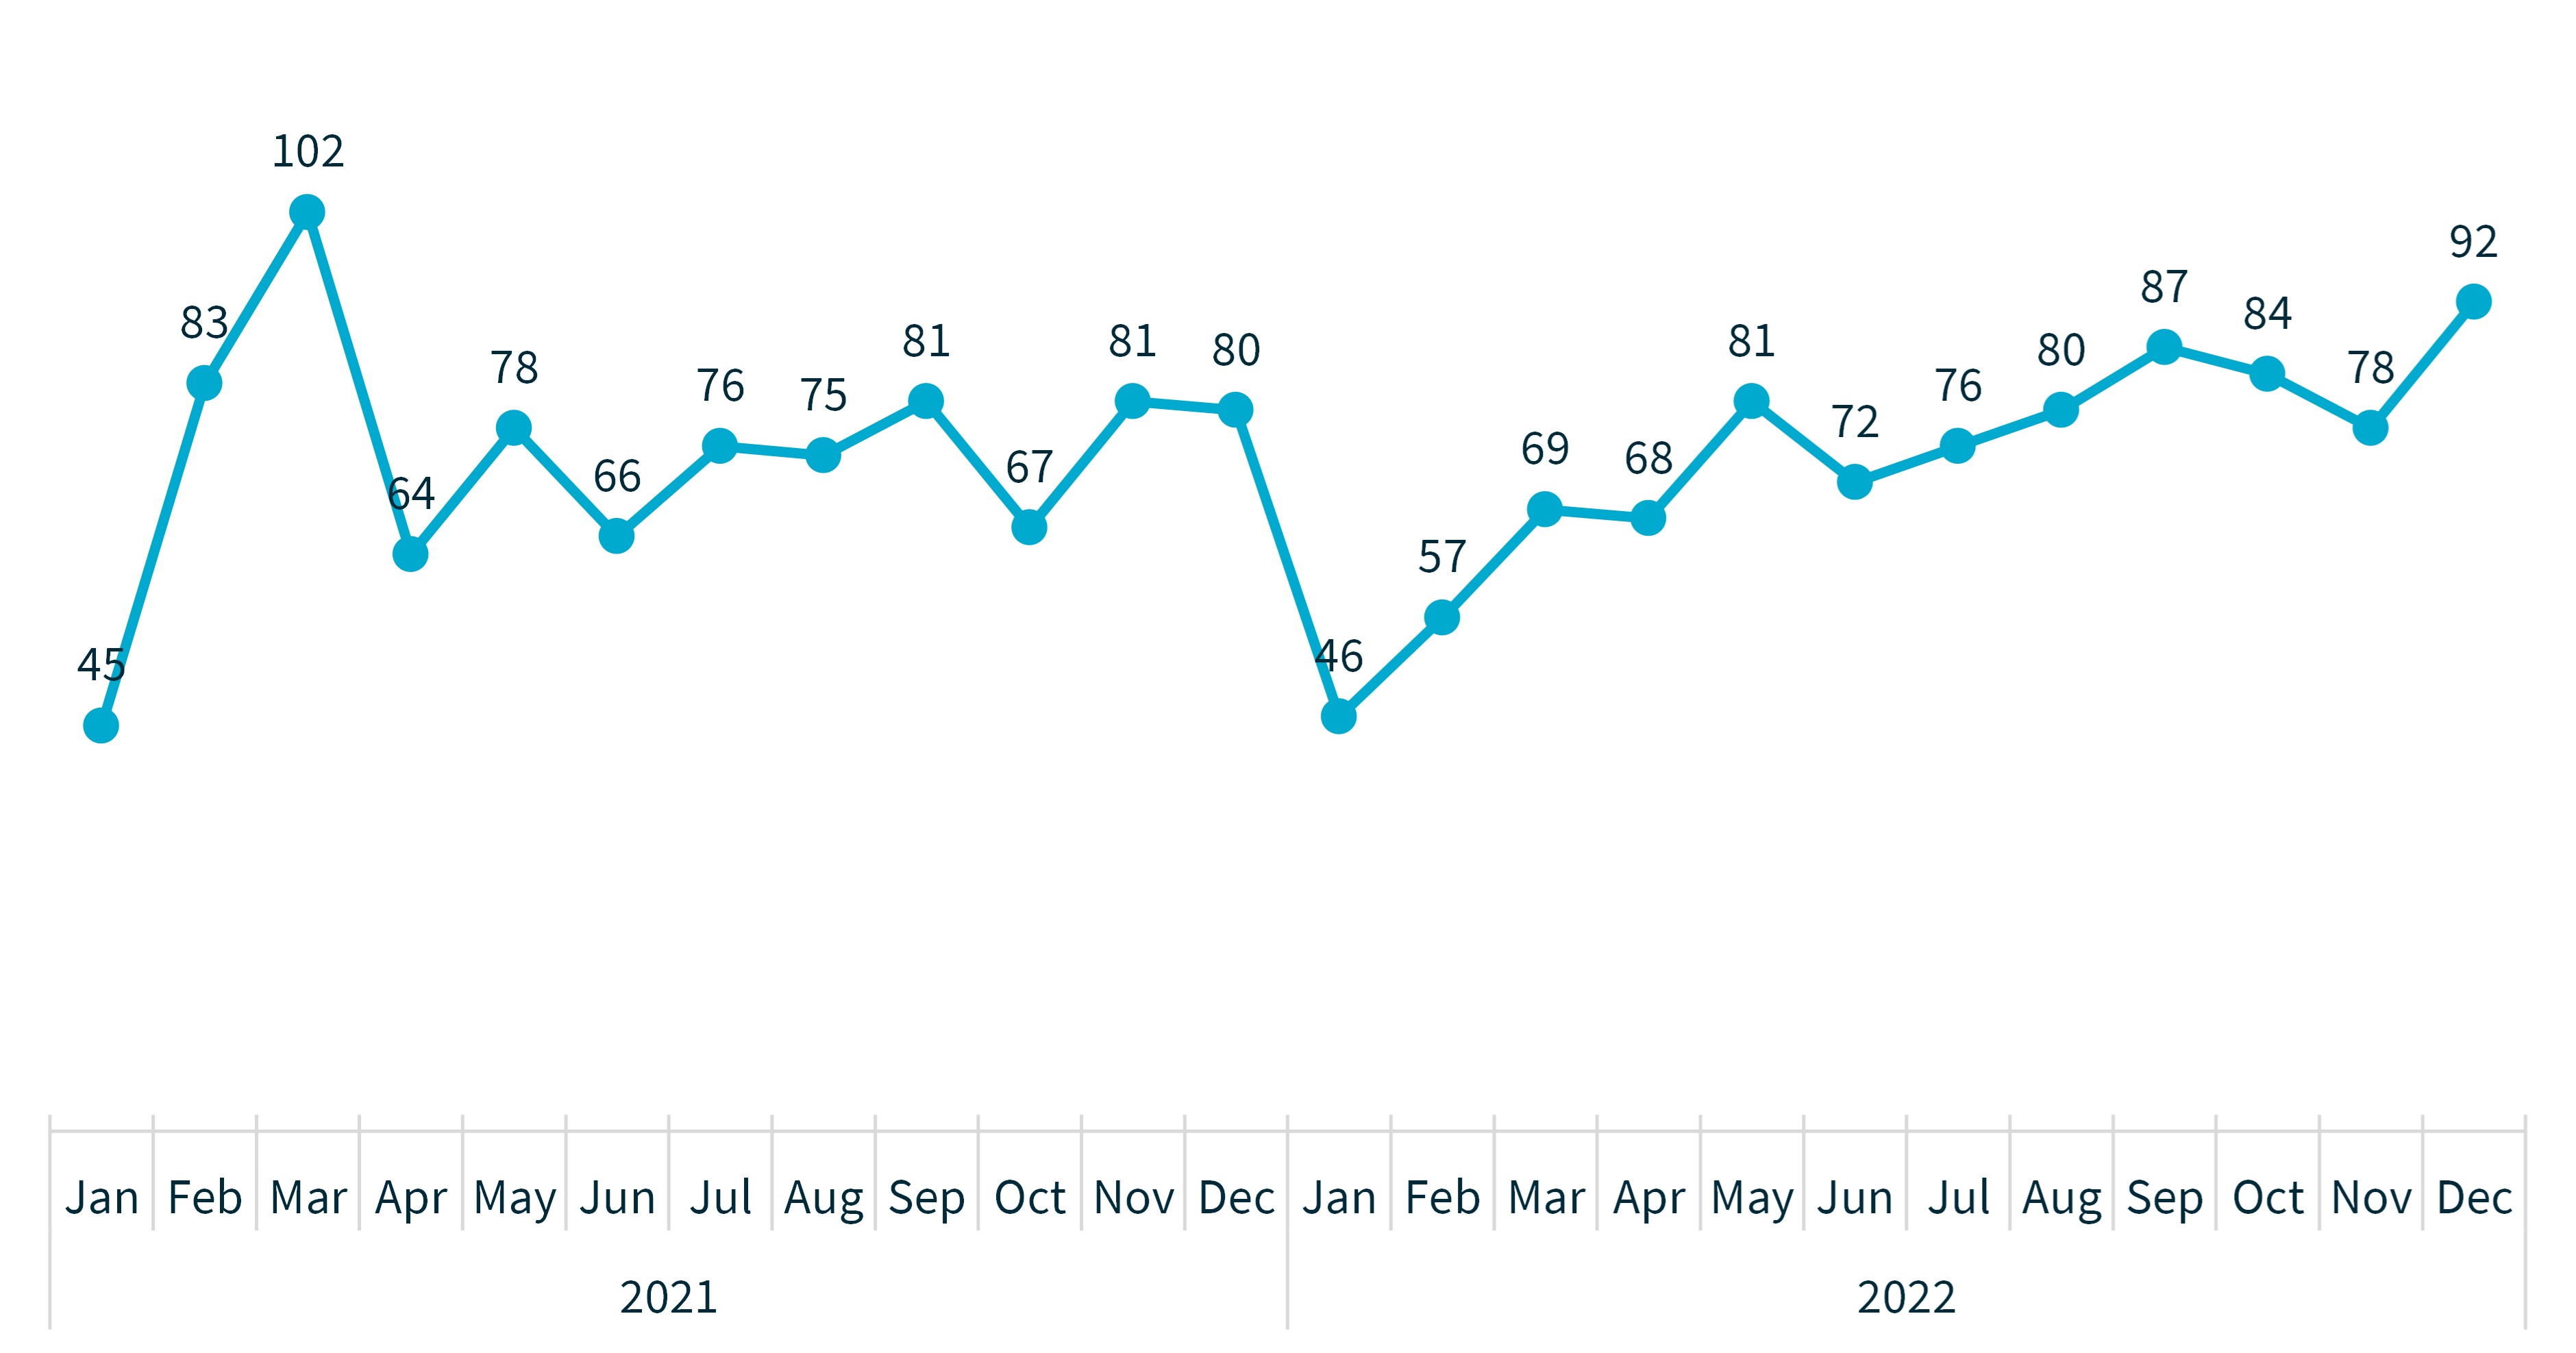 Chart 1 – Notifications received by month from January 2021 to December 2022